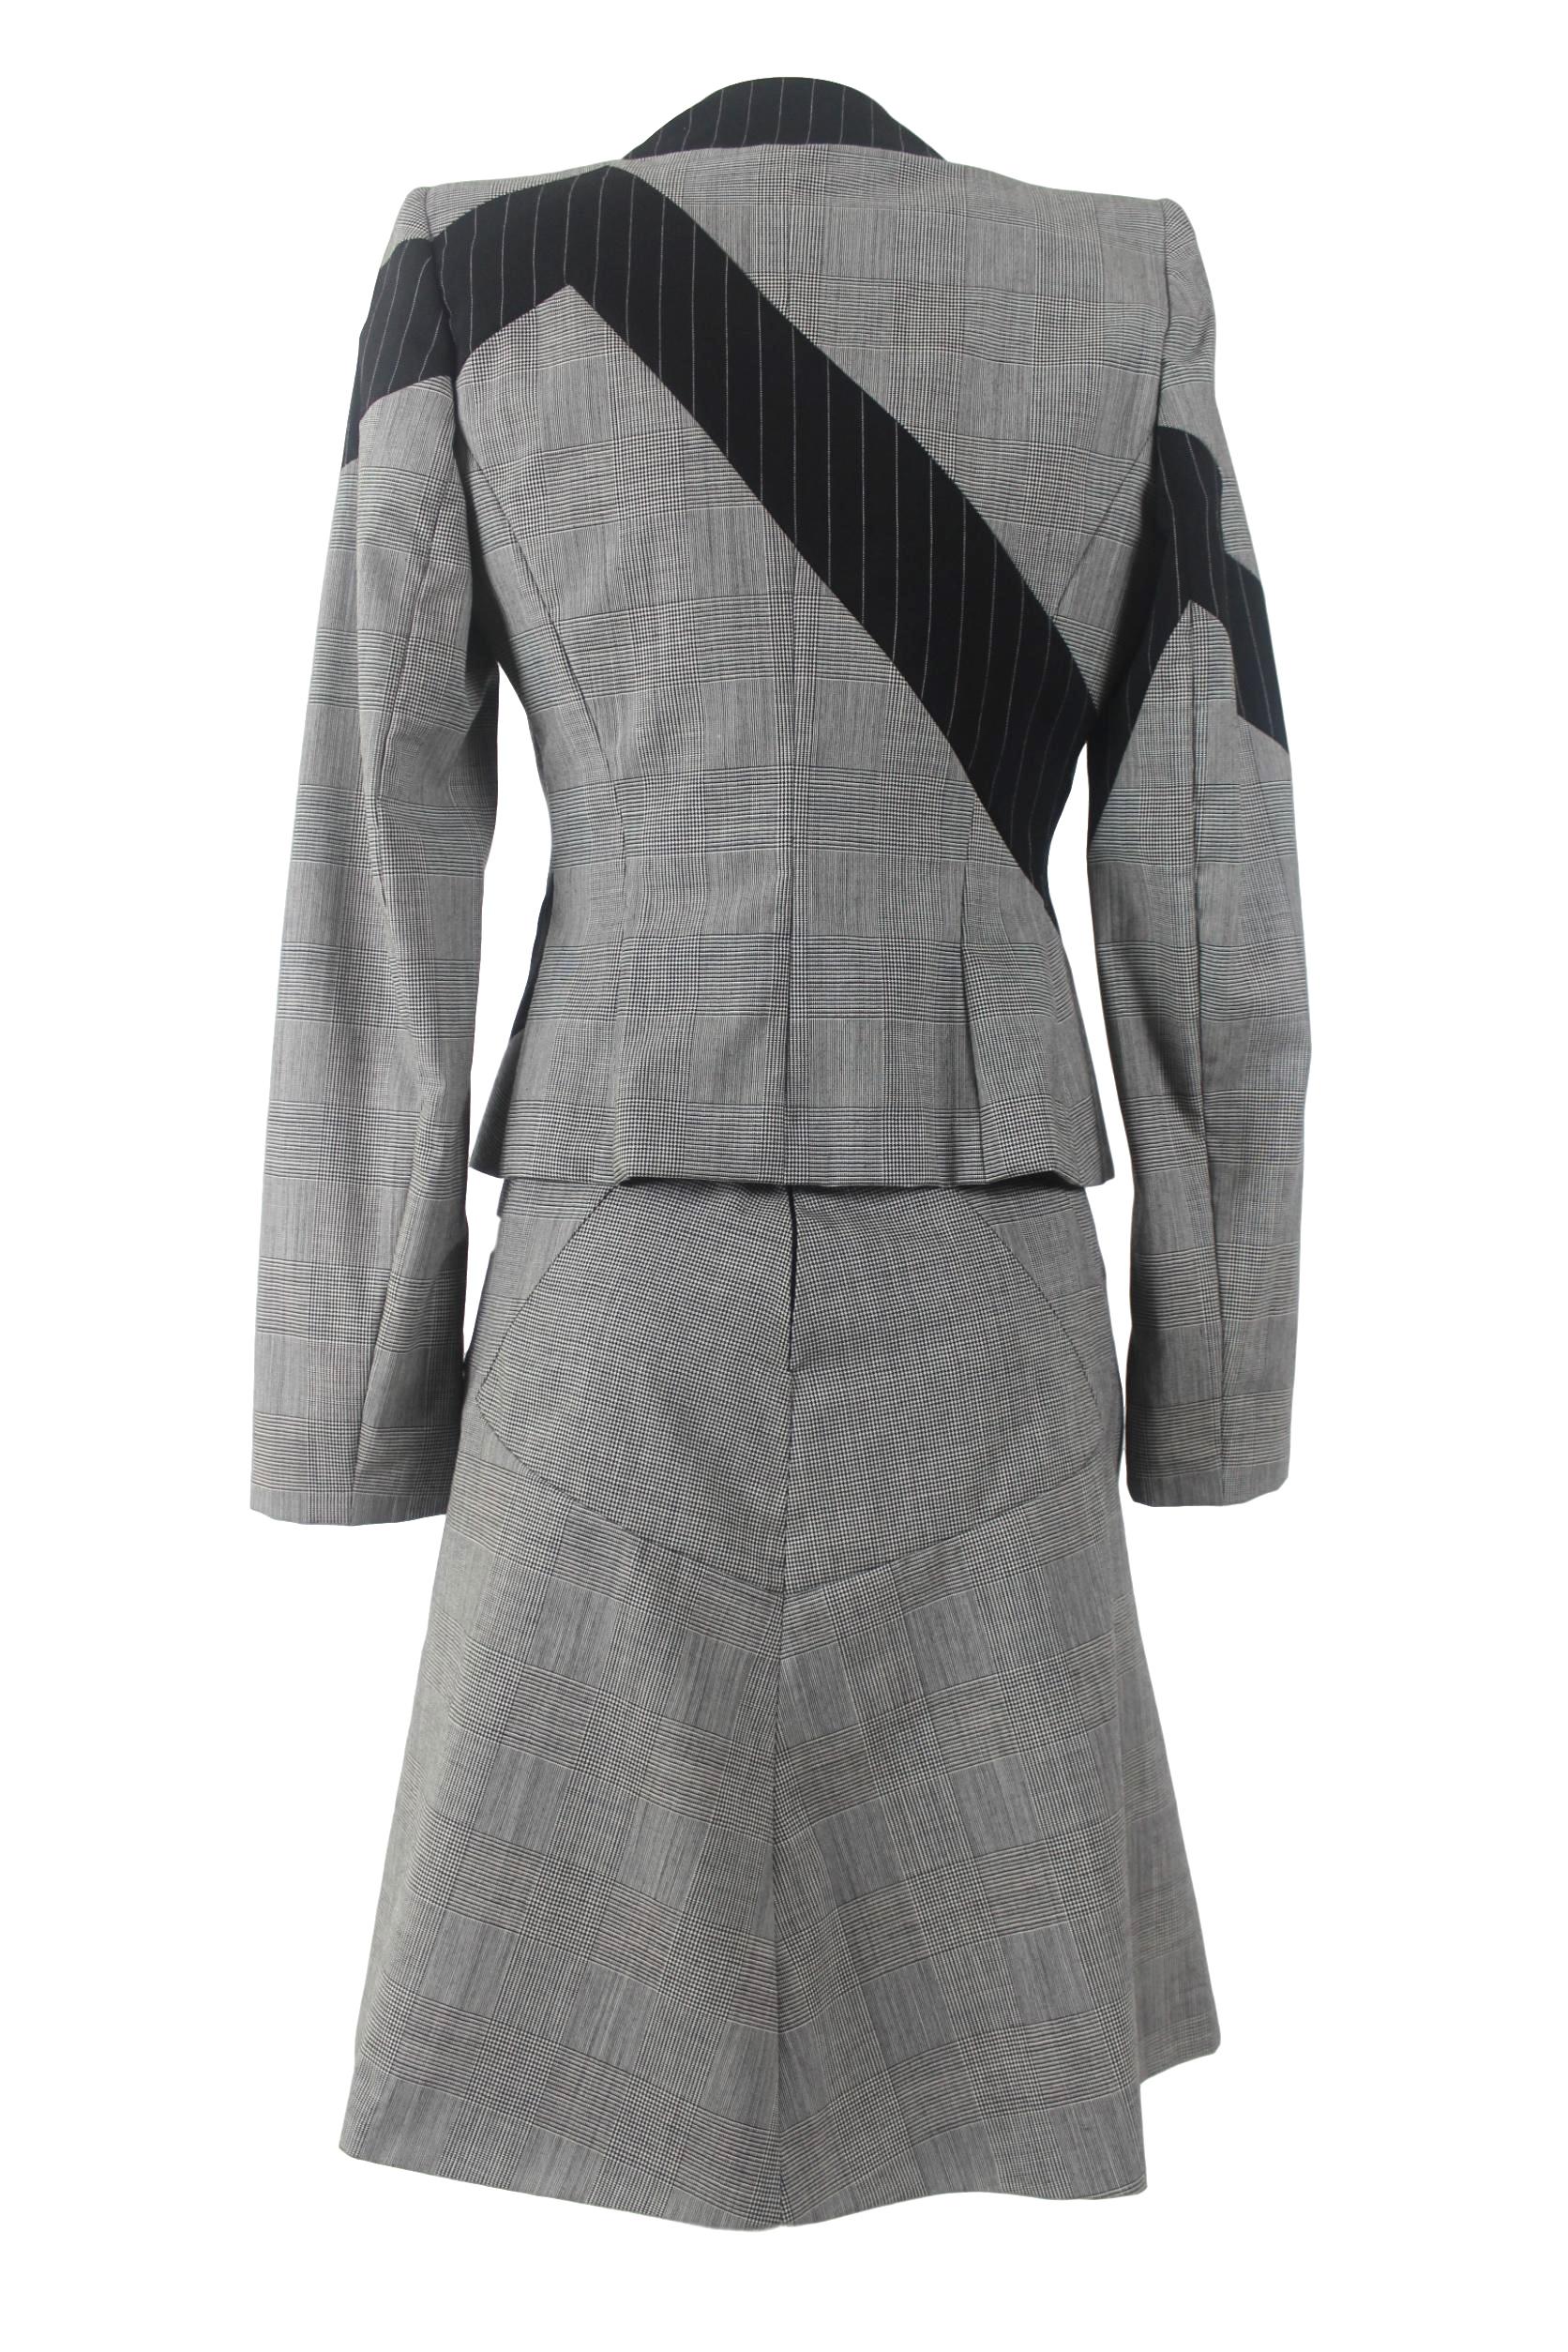 Gray Alexander McQueen Fitted Skirt Suit 1997 Collection For Sale